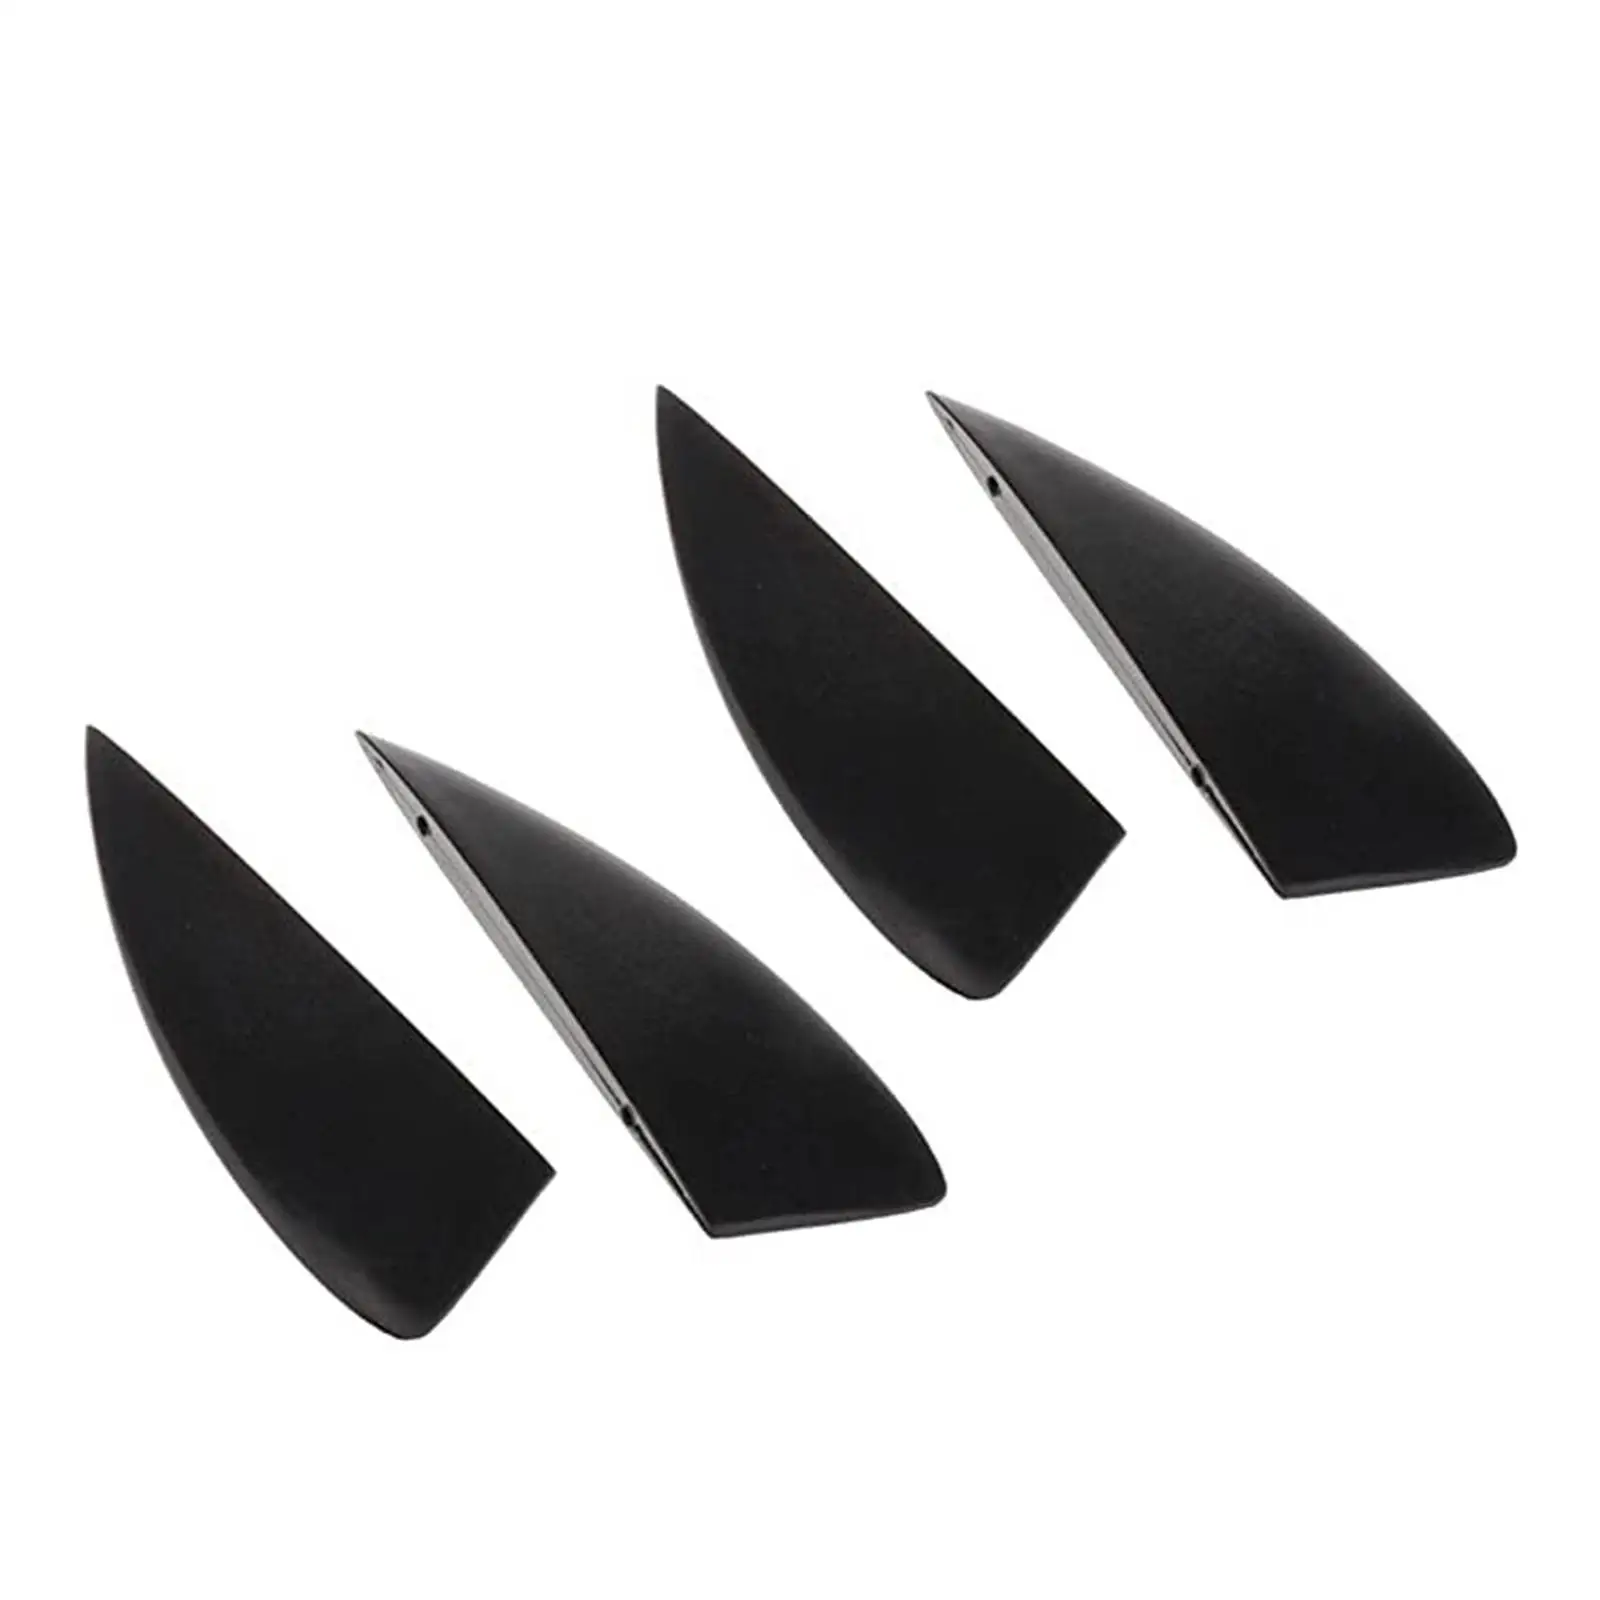 4x Kiteboard Fin with 8 Gasket Wakeboard Replacement Fins Surfboard Fins for Paddleboard Longboard Beach Surfing Water Sports